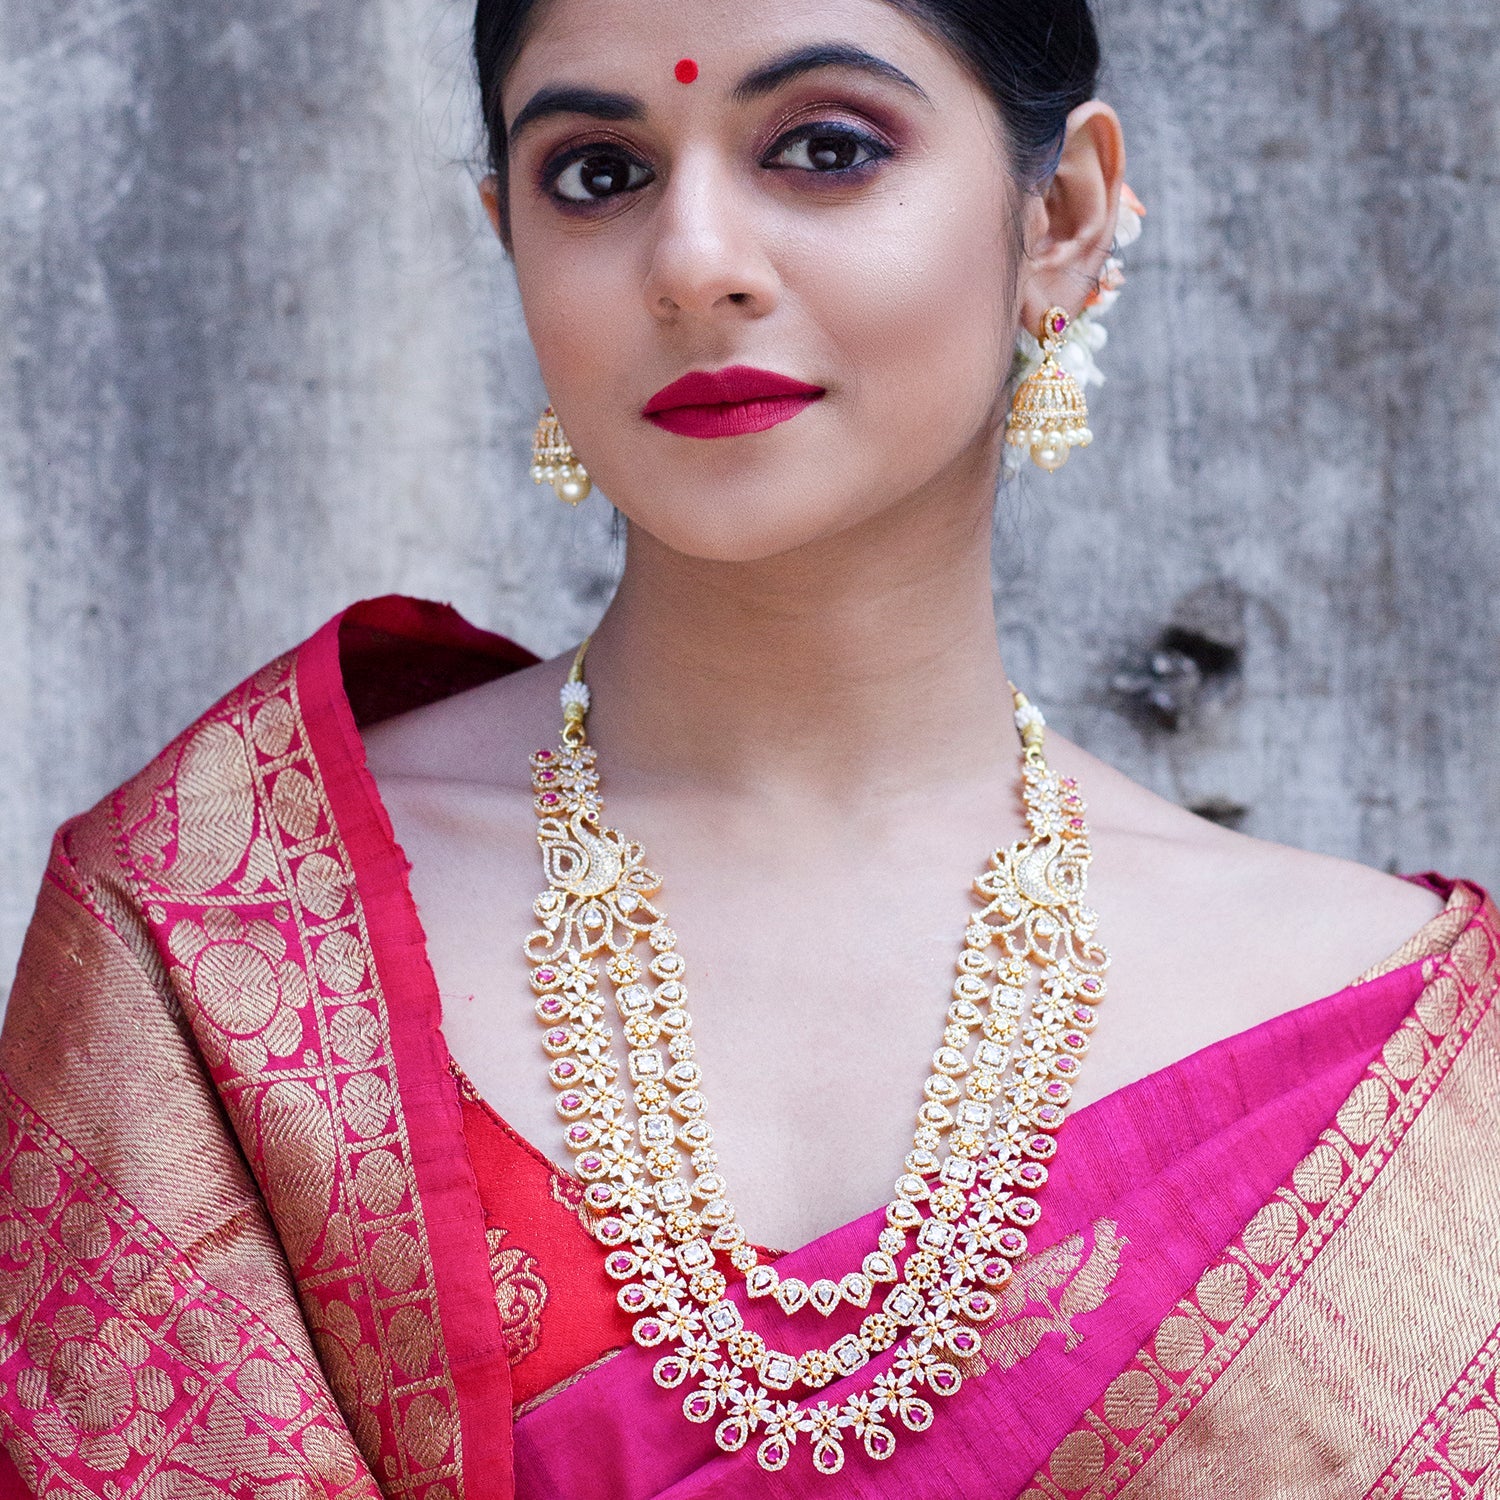 MODERN KUNDAN JEWELLERY IS BRINGING BACK THE CHARM OF CELEBRATED FASHION TRENDS